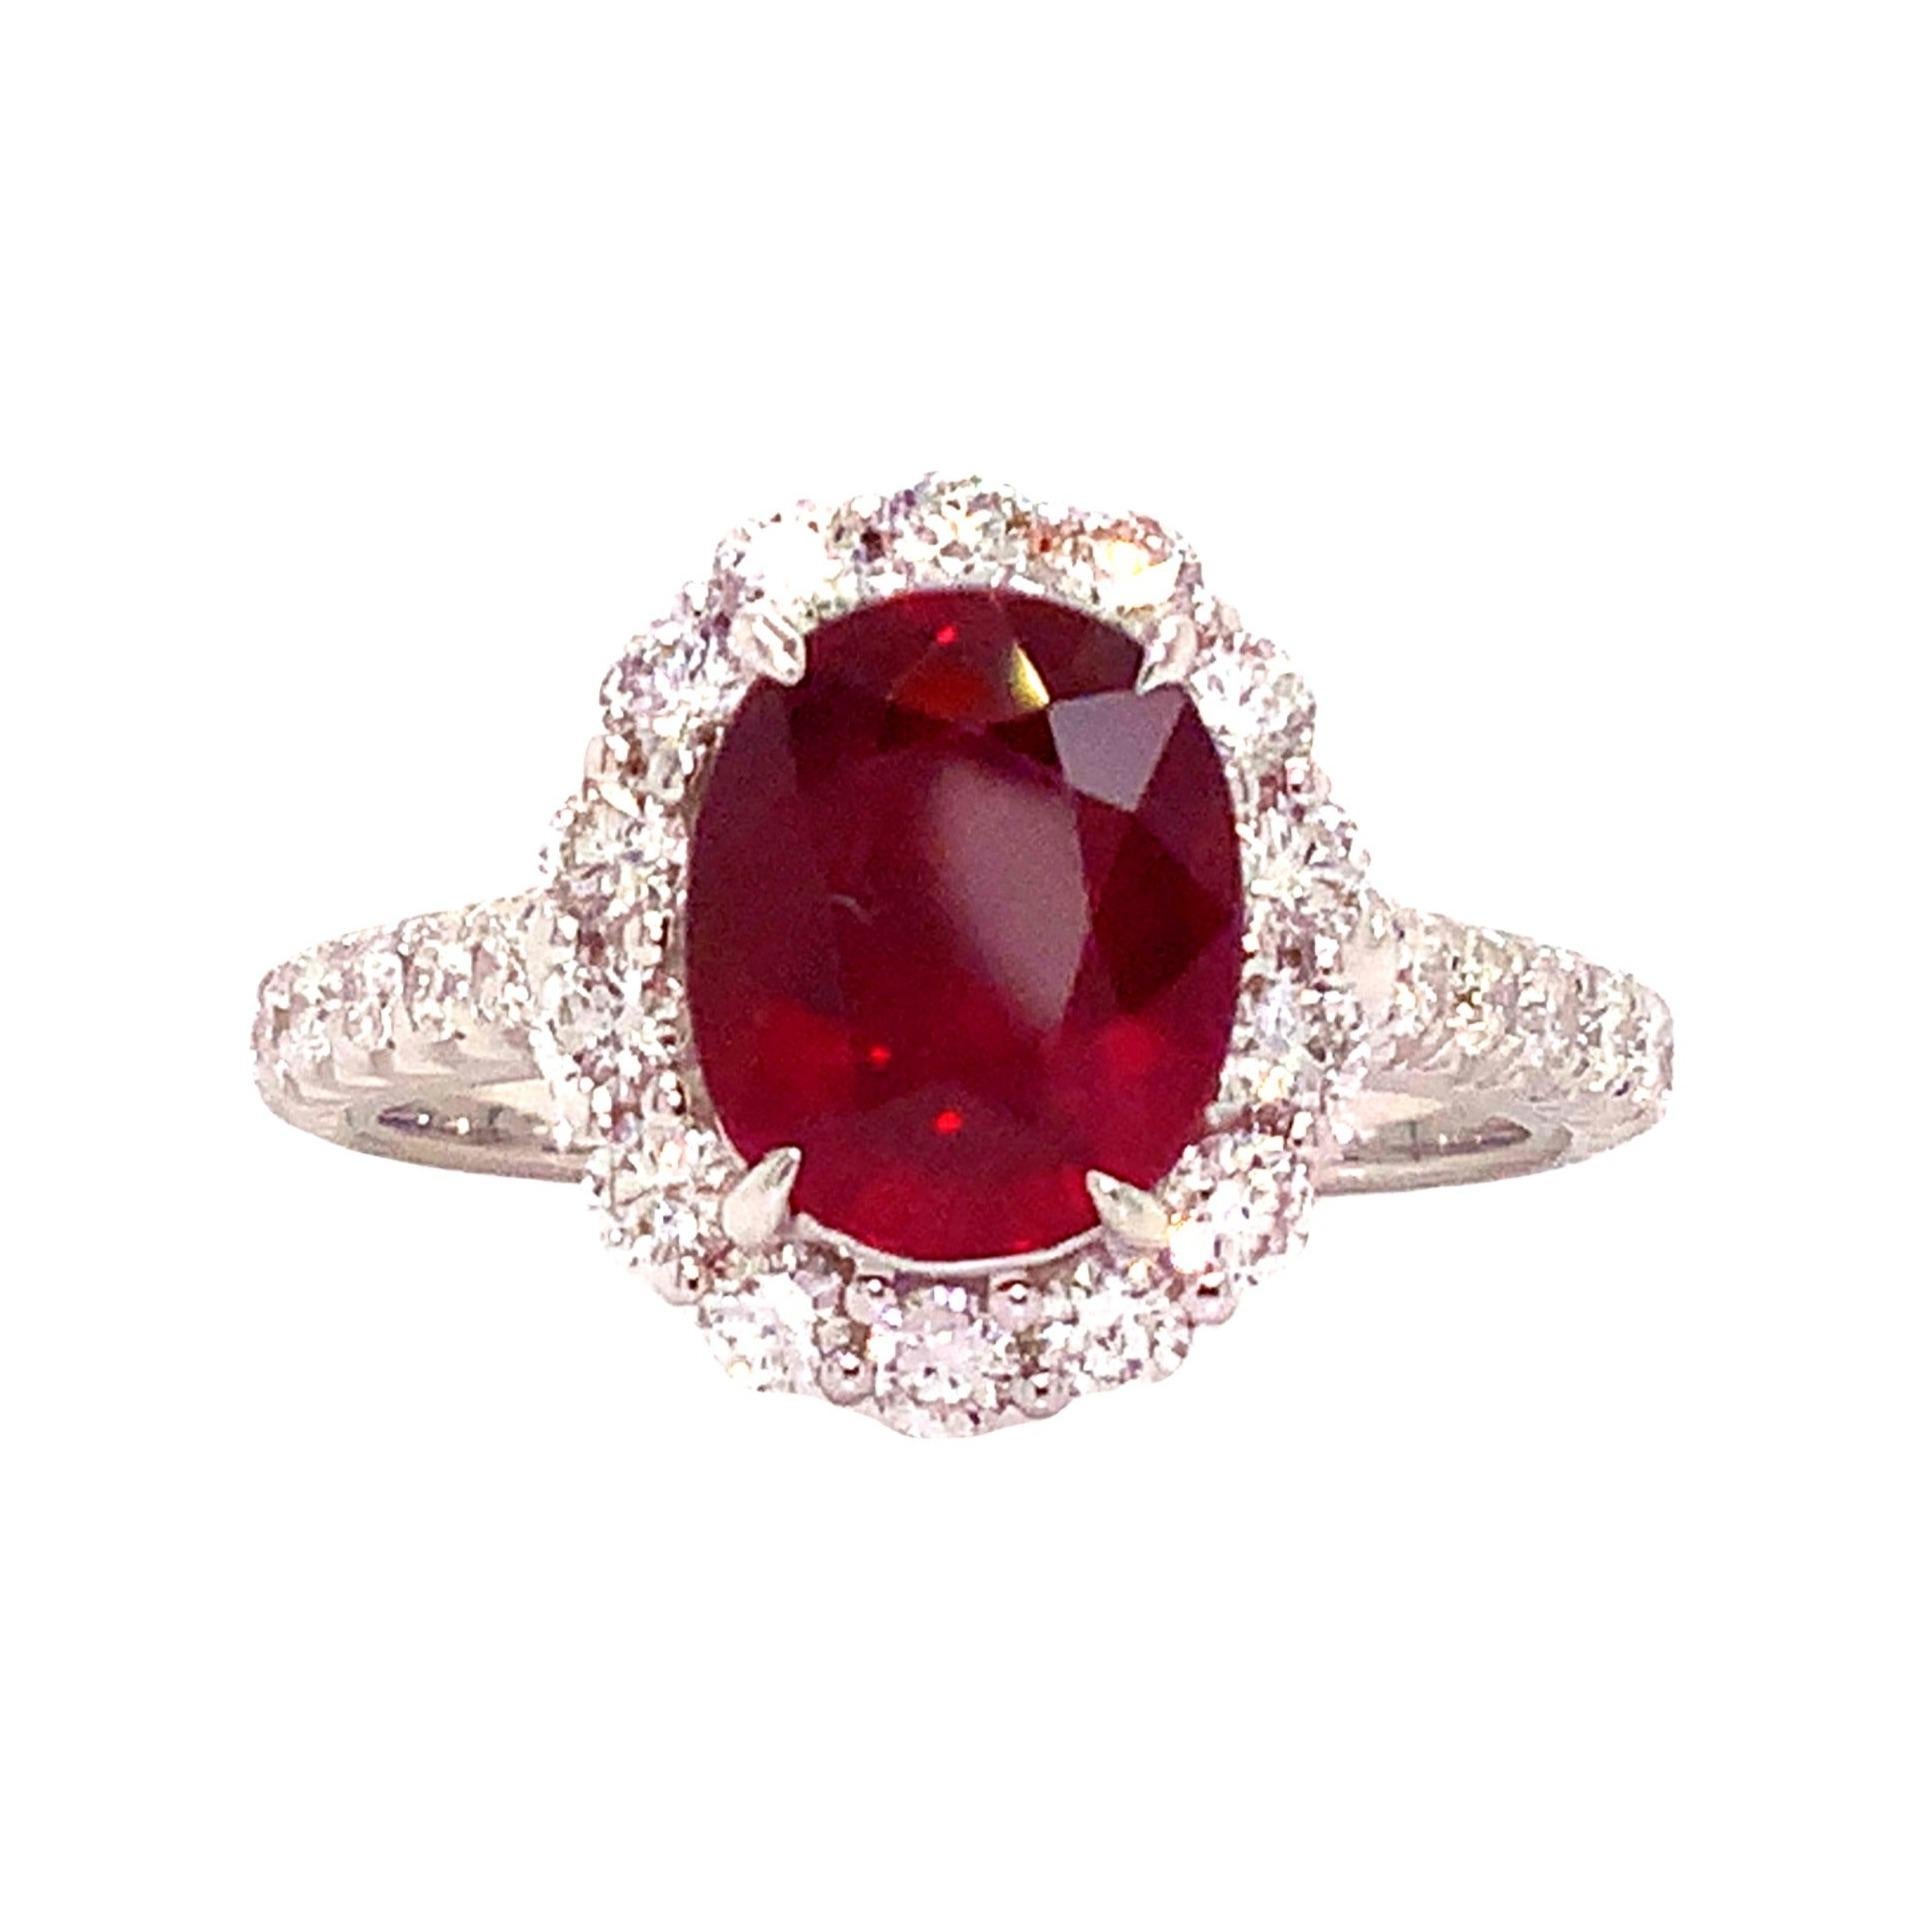 Roman + Jules Classic 2.52 ct Gem Quality Red Ruby and Diamond Halo Ring set in 18 Karat White Gold. This Truly Exceptional Ruby is very Rare and Precious. 
The Fire and Intensity that this One of a Kind Ruby Possesses is truly a Treasure worth